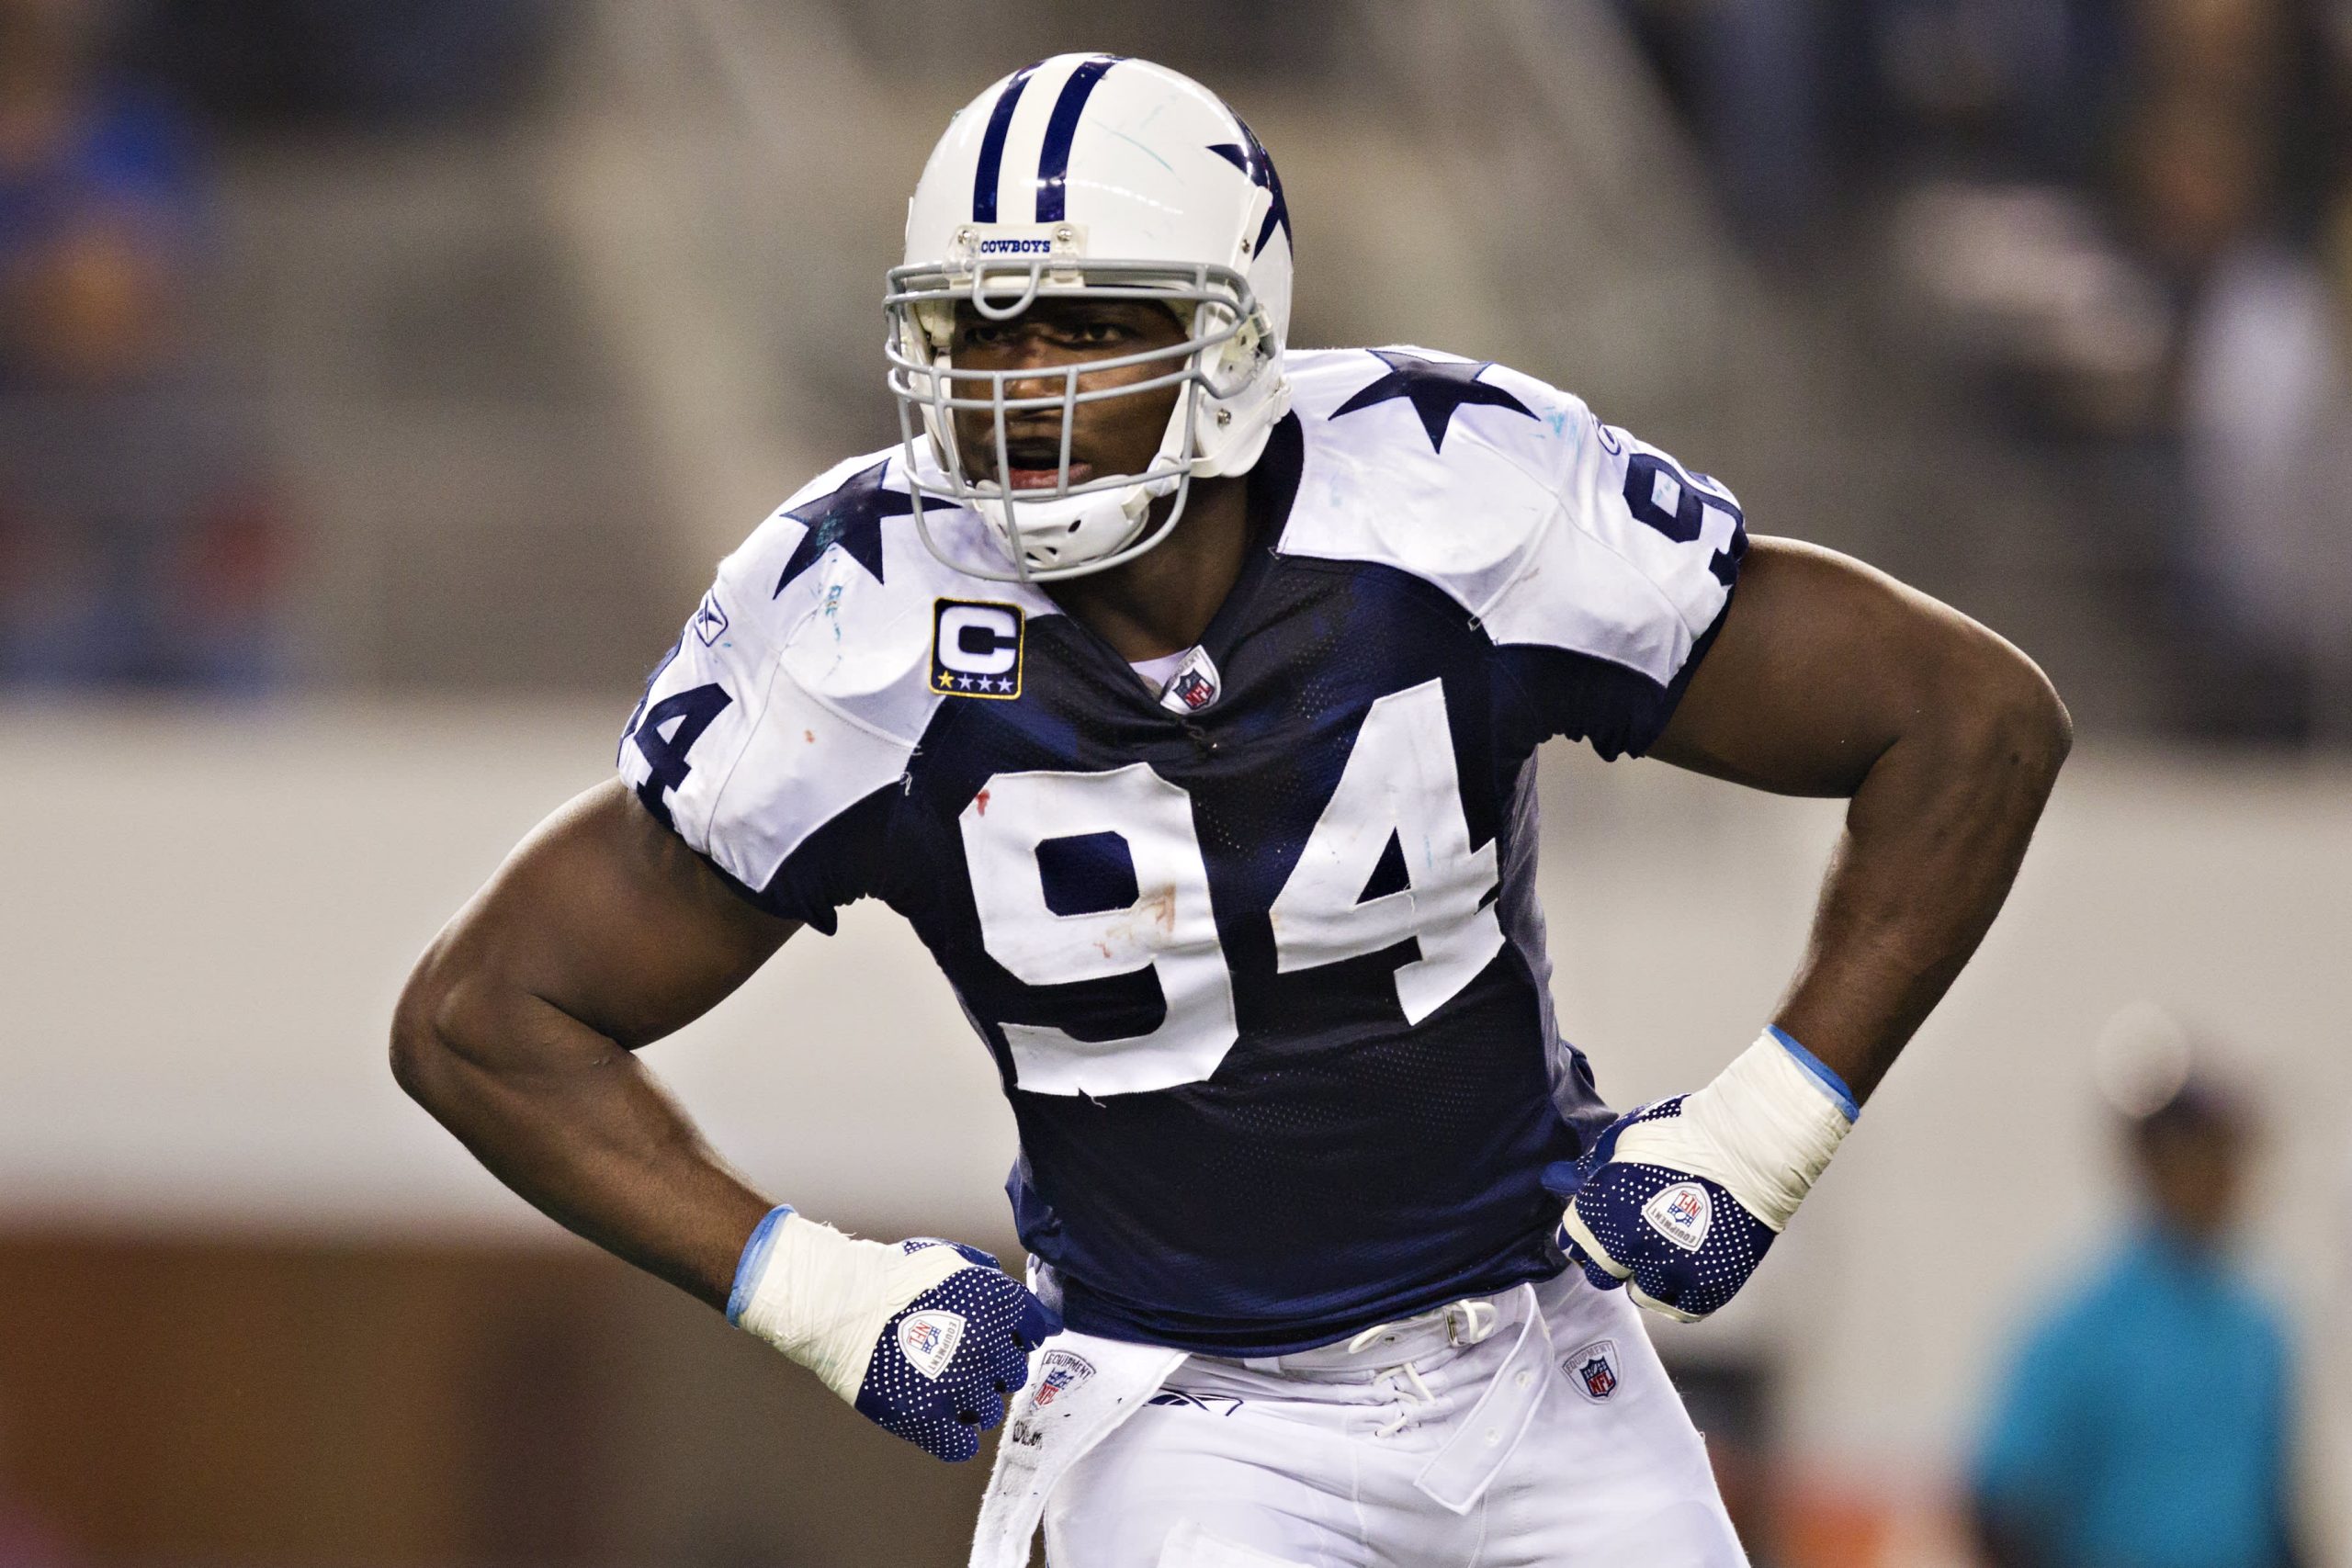 Former NFL star DeMarcus Ware launches health app D2W with Apple’s assist